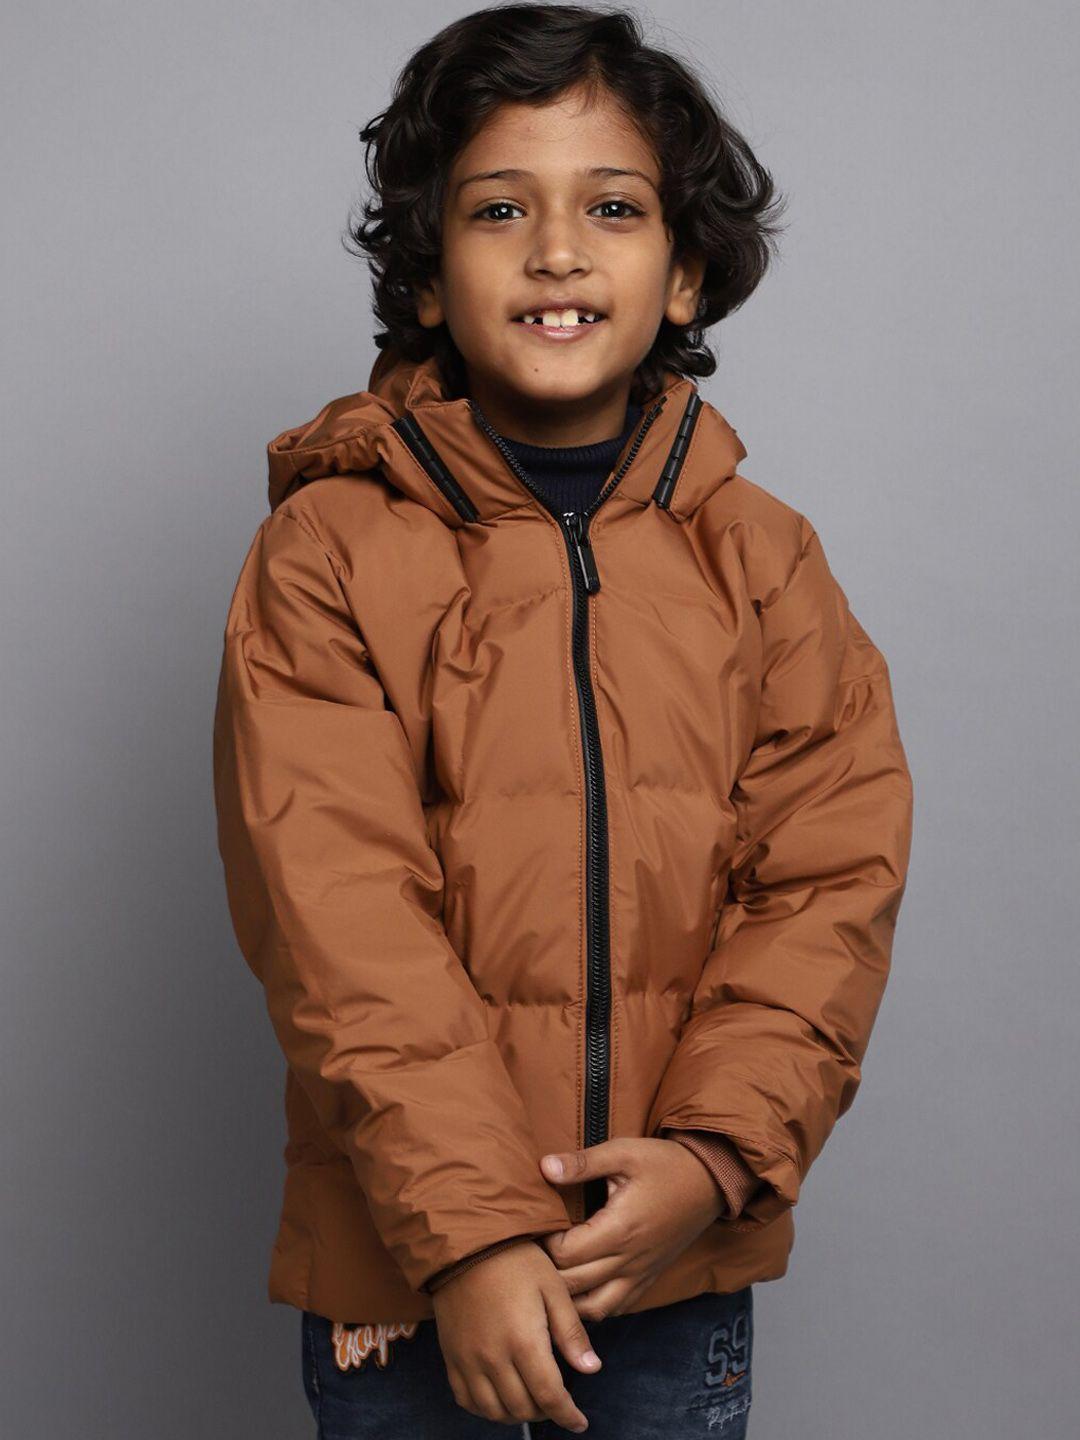 v-mart boys hooded lightweight quilted jacket with zip detail